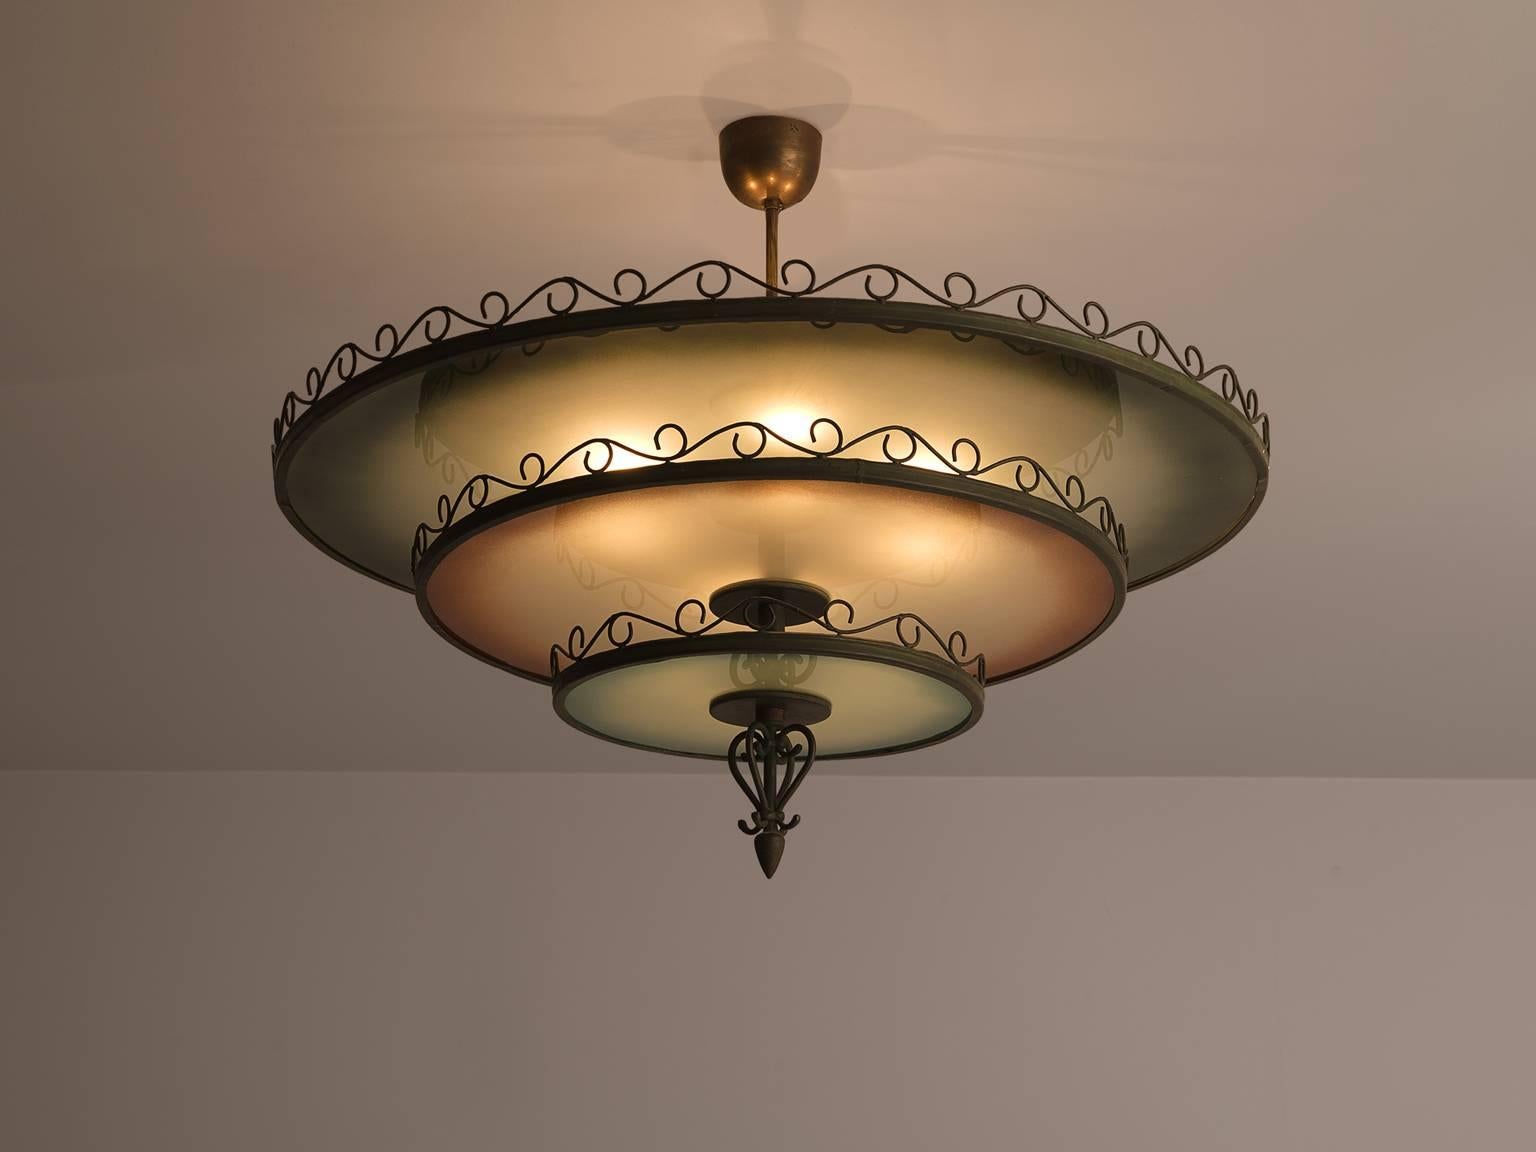 Chandelier glass metal brass, Finland, circa 1930.

This Art Deco chandelier with eloquent forgings and three different shades of glass is both refined and robust at the same time. The chandelier is built up of three different layers in various